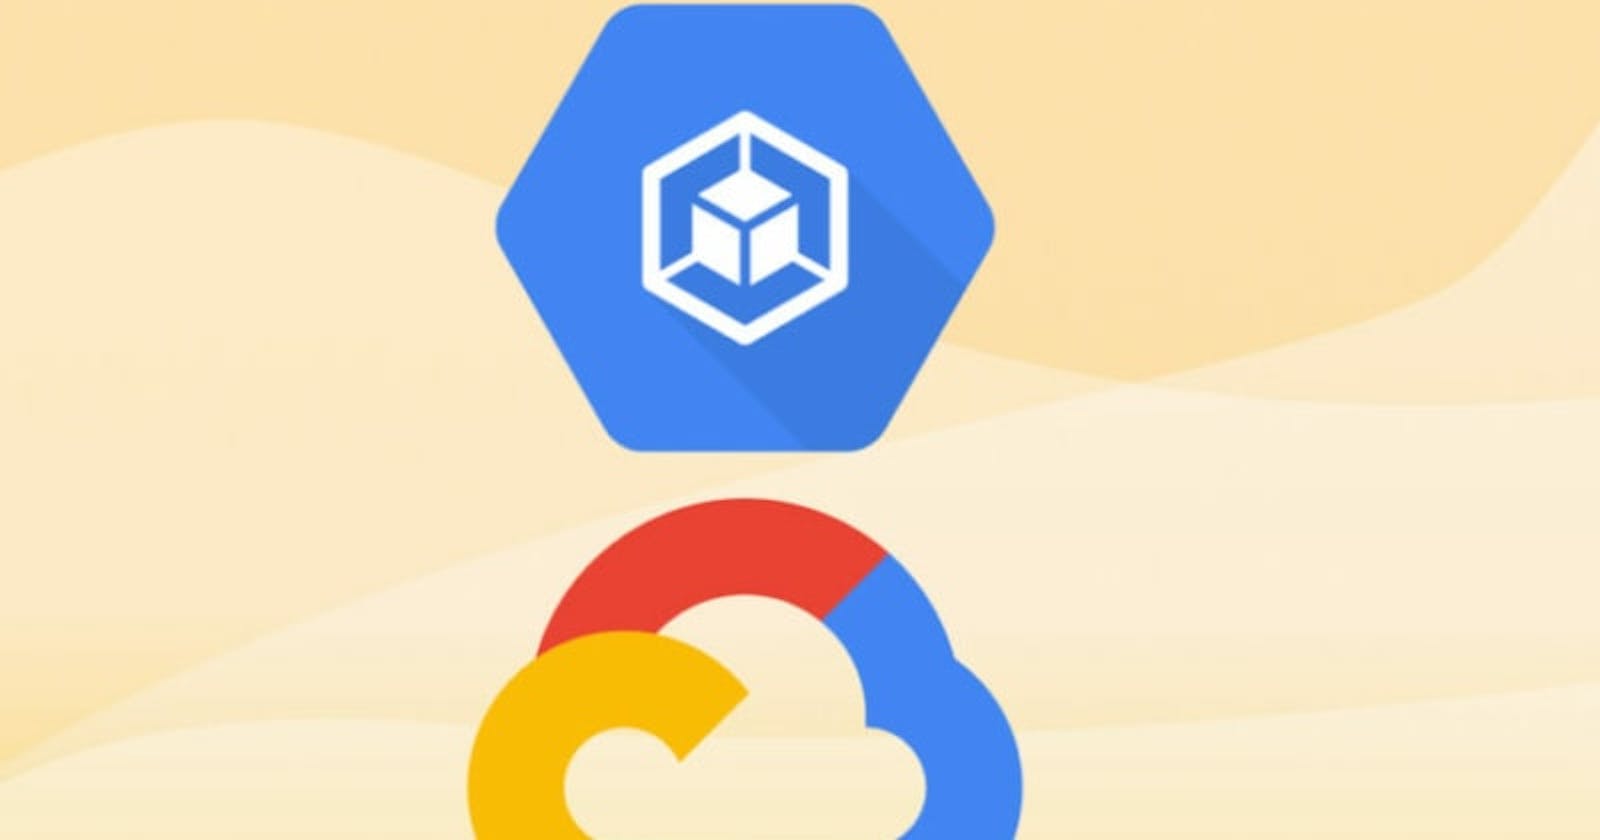 Deploying a Containerized App in Google GKE